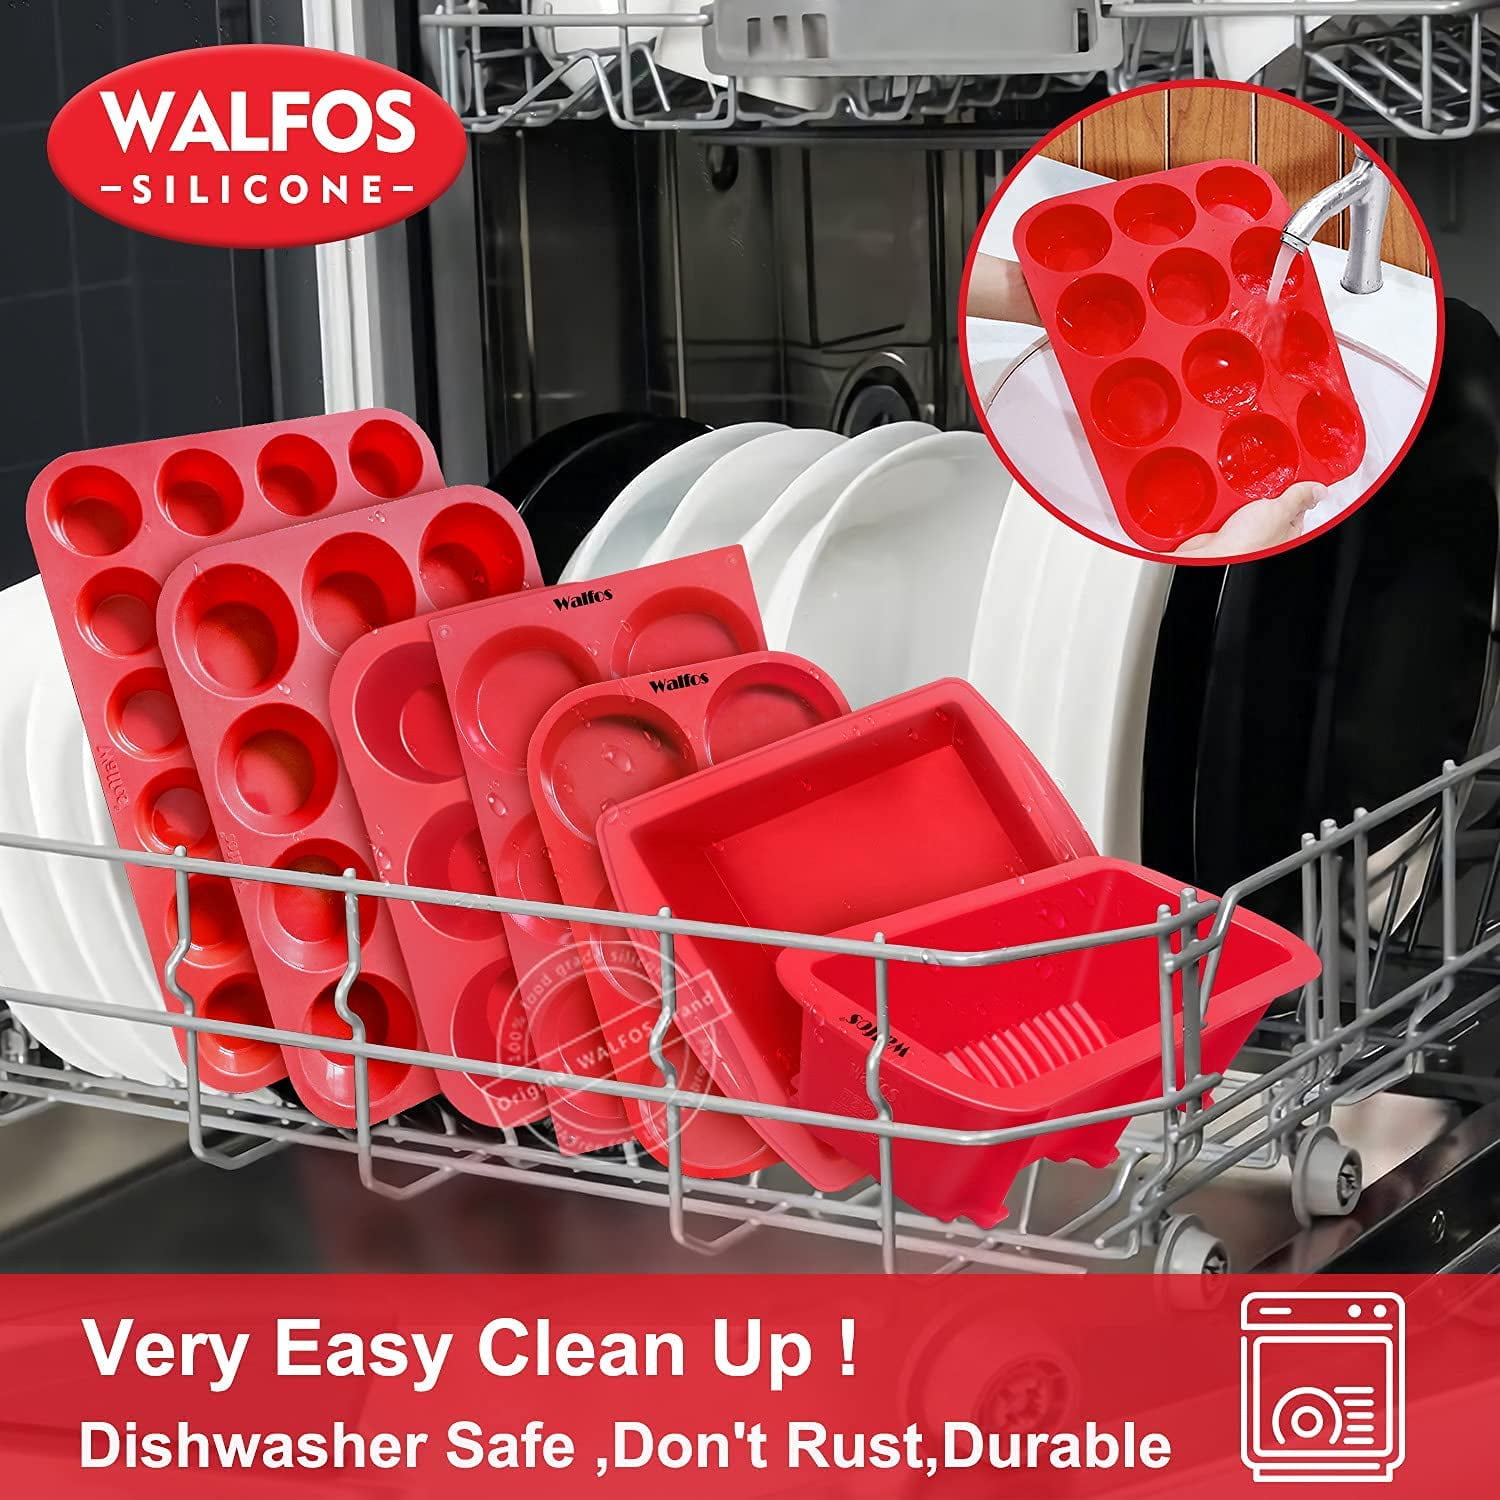 Walfos Silicone Texas Muffin Pan Set- 6 Cup Jumbo Silicone Cupcake Pan Perfect for Egg Muffin Non-Stick Silicone BPA Free & Dishwasher Safe Big Cupcake Just PoP Out Set of 2